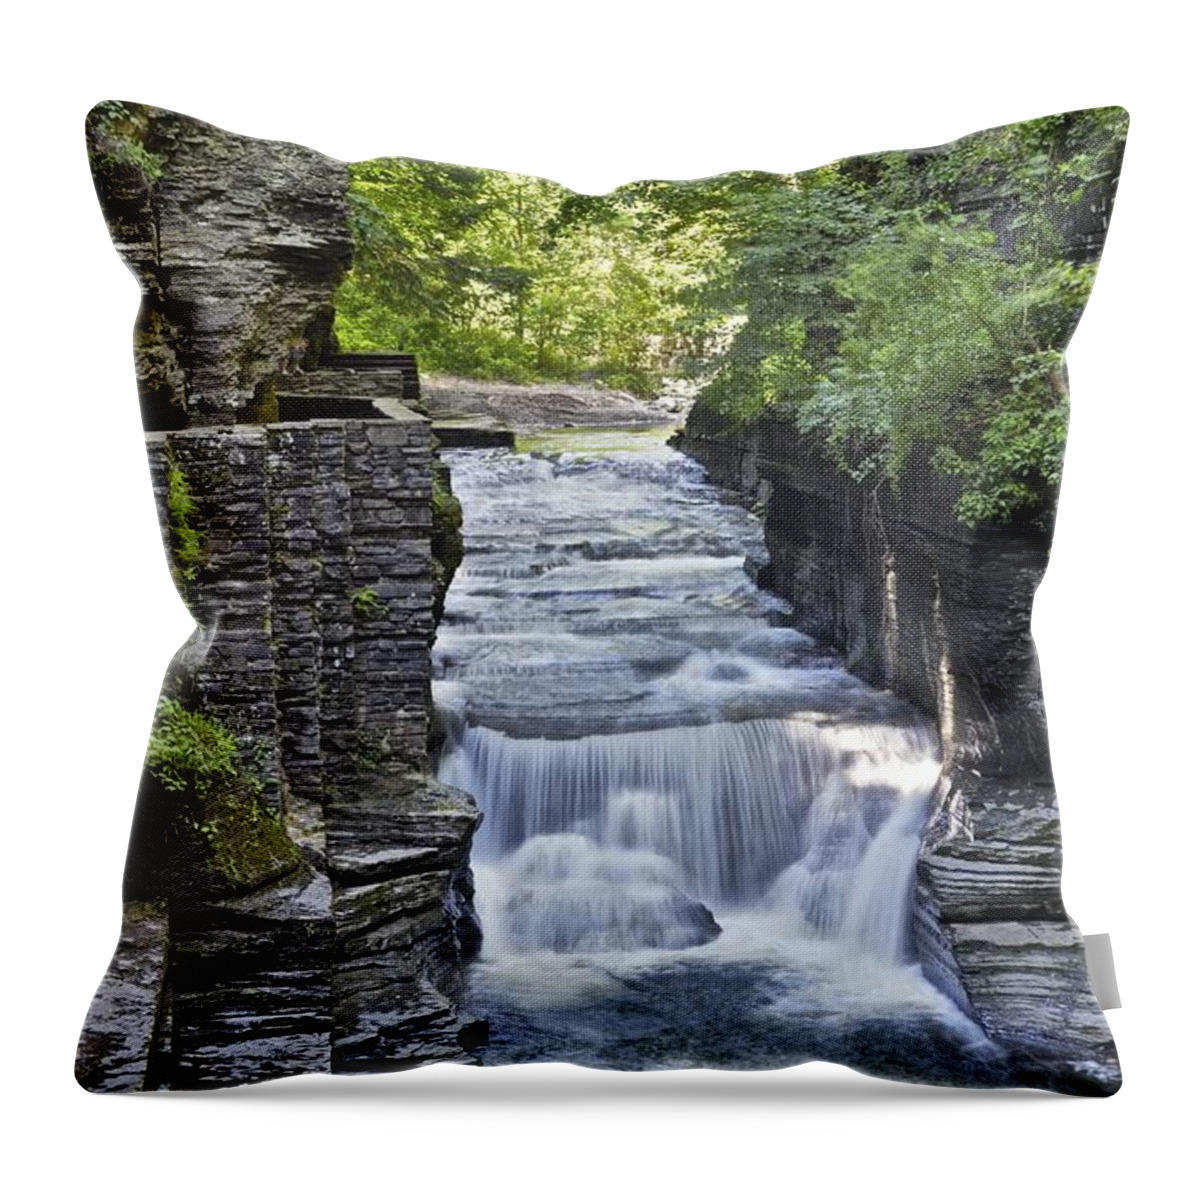 Robert Throw Pillow featuring the photograph Robert Treman State Park #2 by Frozen in Time Fine Art Photography